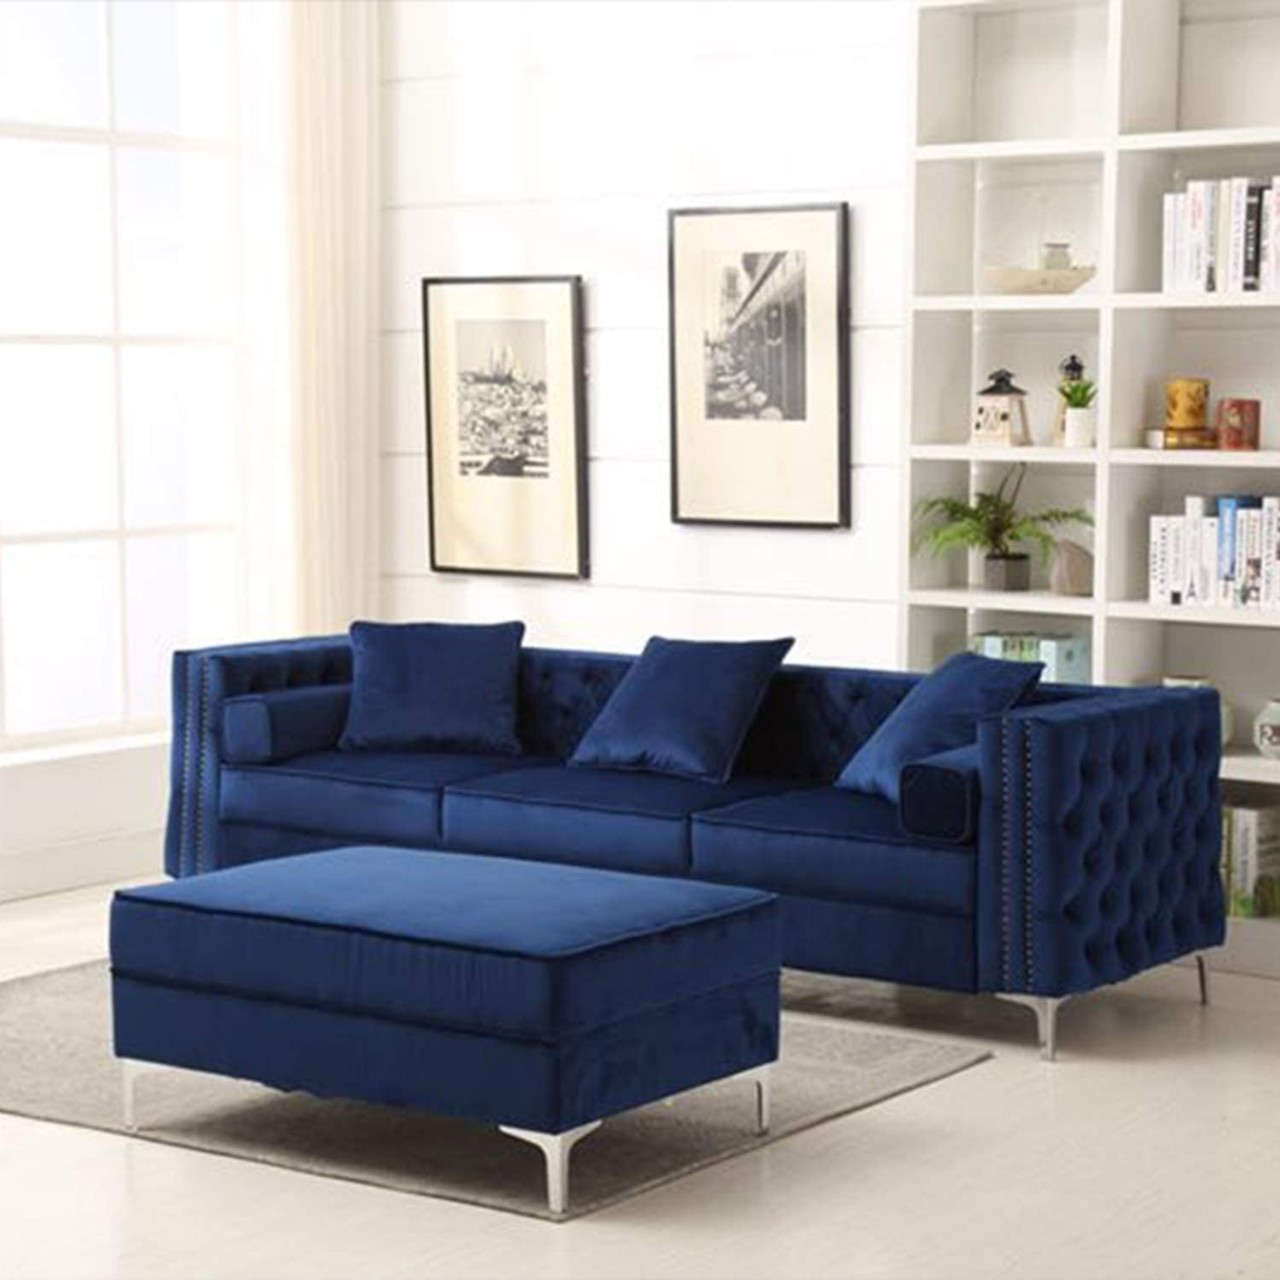 Modern Luxury Sectional Sofa Velvet 3-Seat Sofa with Movable Chaise Ottoman 3 Cushions 2 Pillows